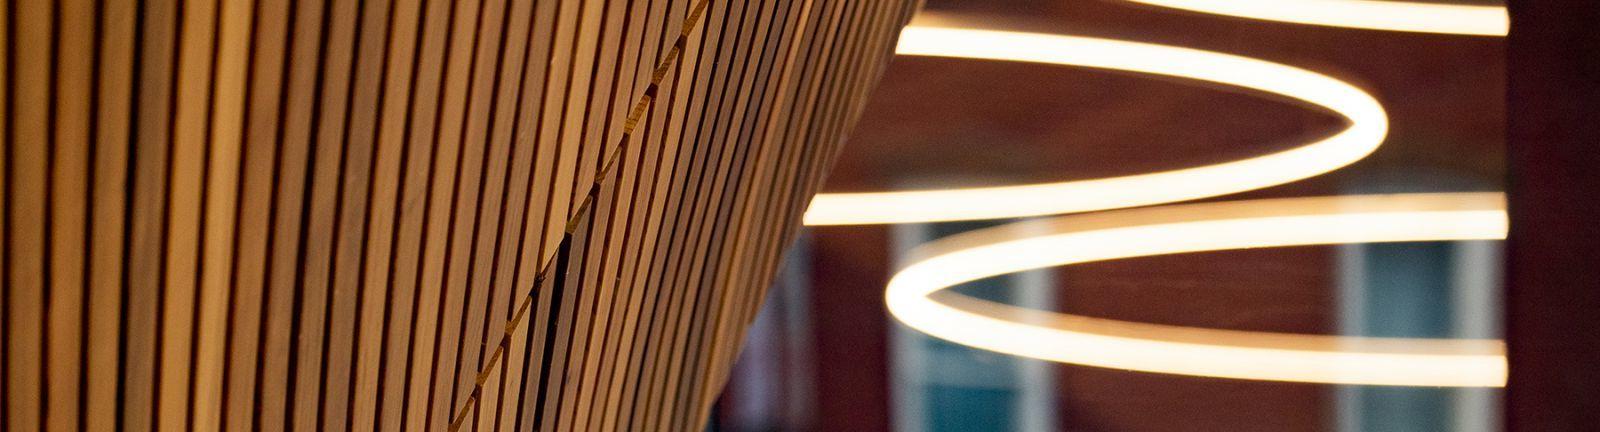 Abstract of lighting and wood elements in Temple's Charles Library.